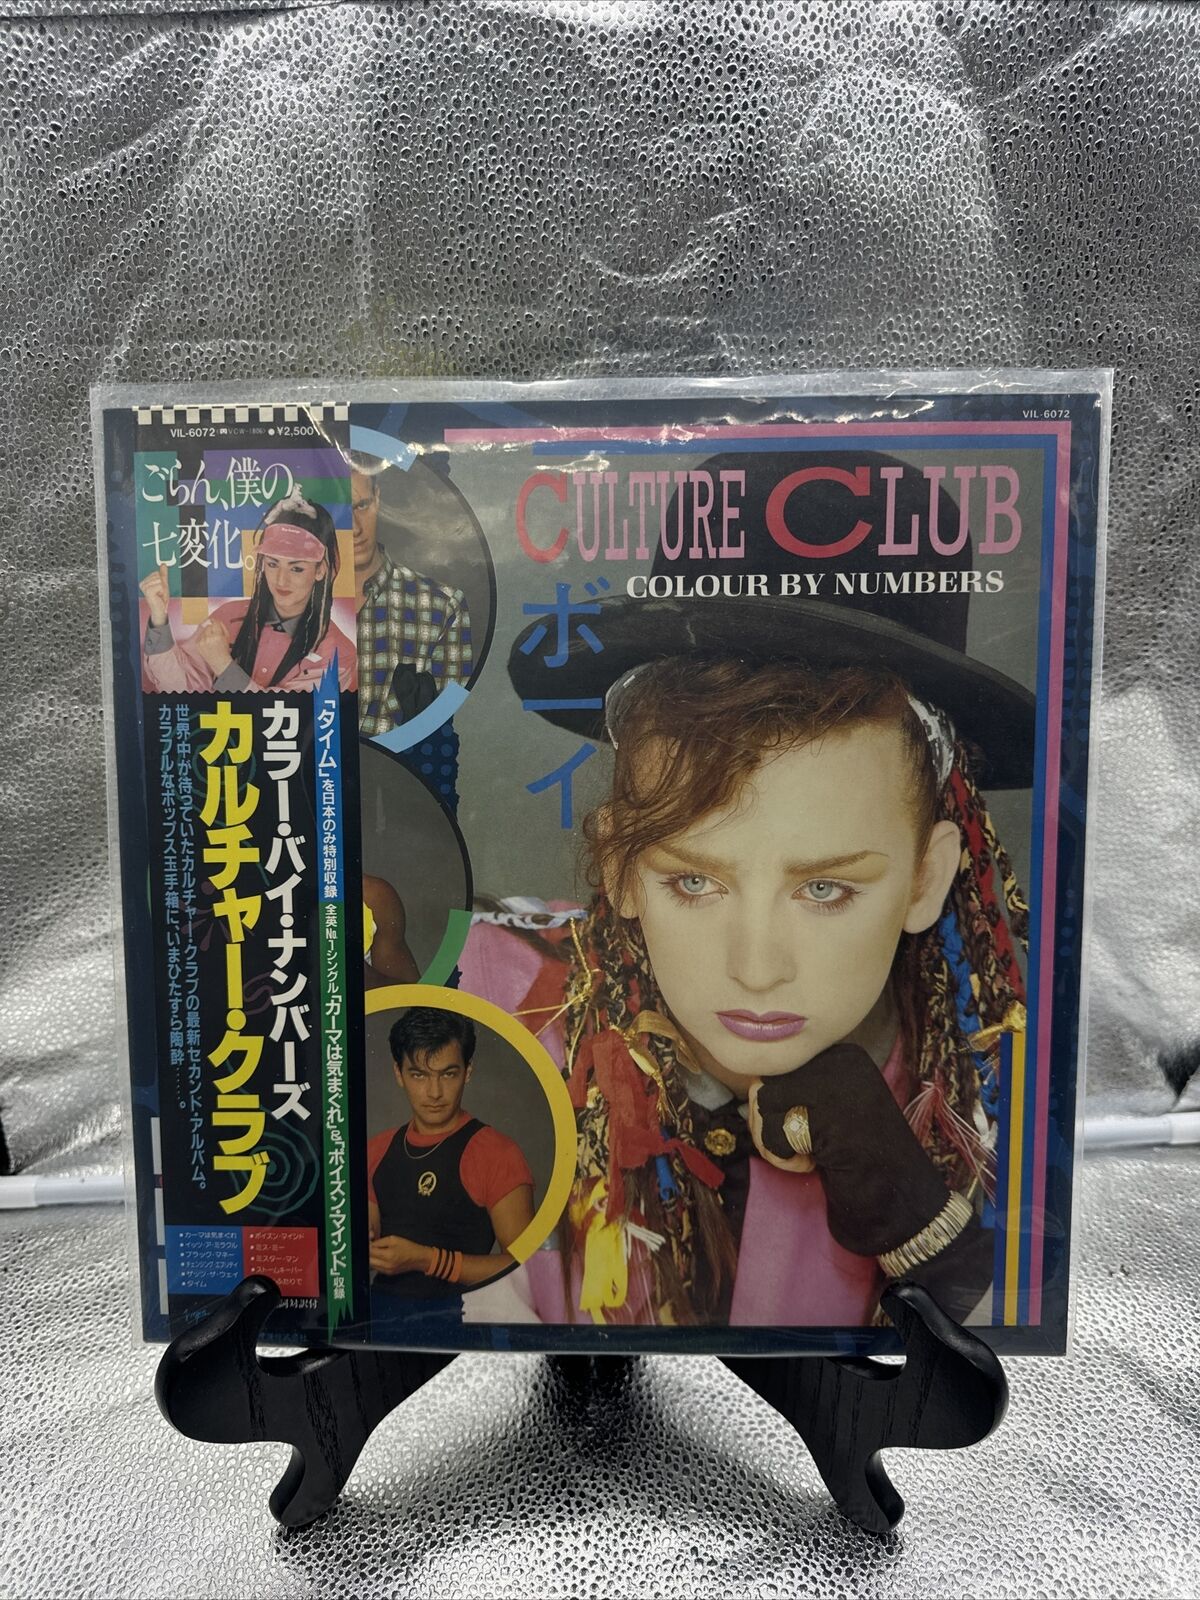 CULTURE CLUB - COLOUR BY NUMBERS- JAPAN 83 - W/ OBI & LYRIC INSERT *BEAUTY* LP